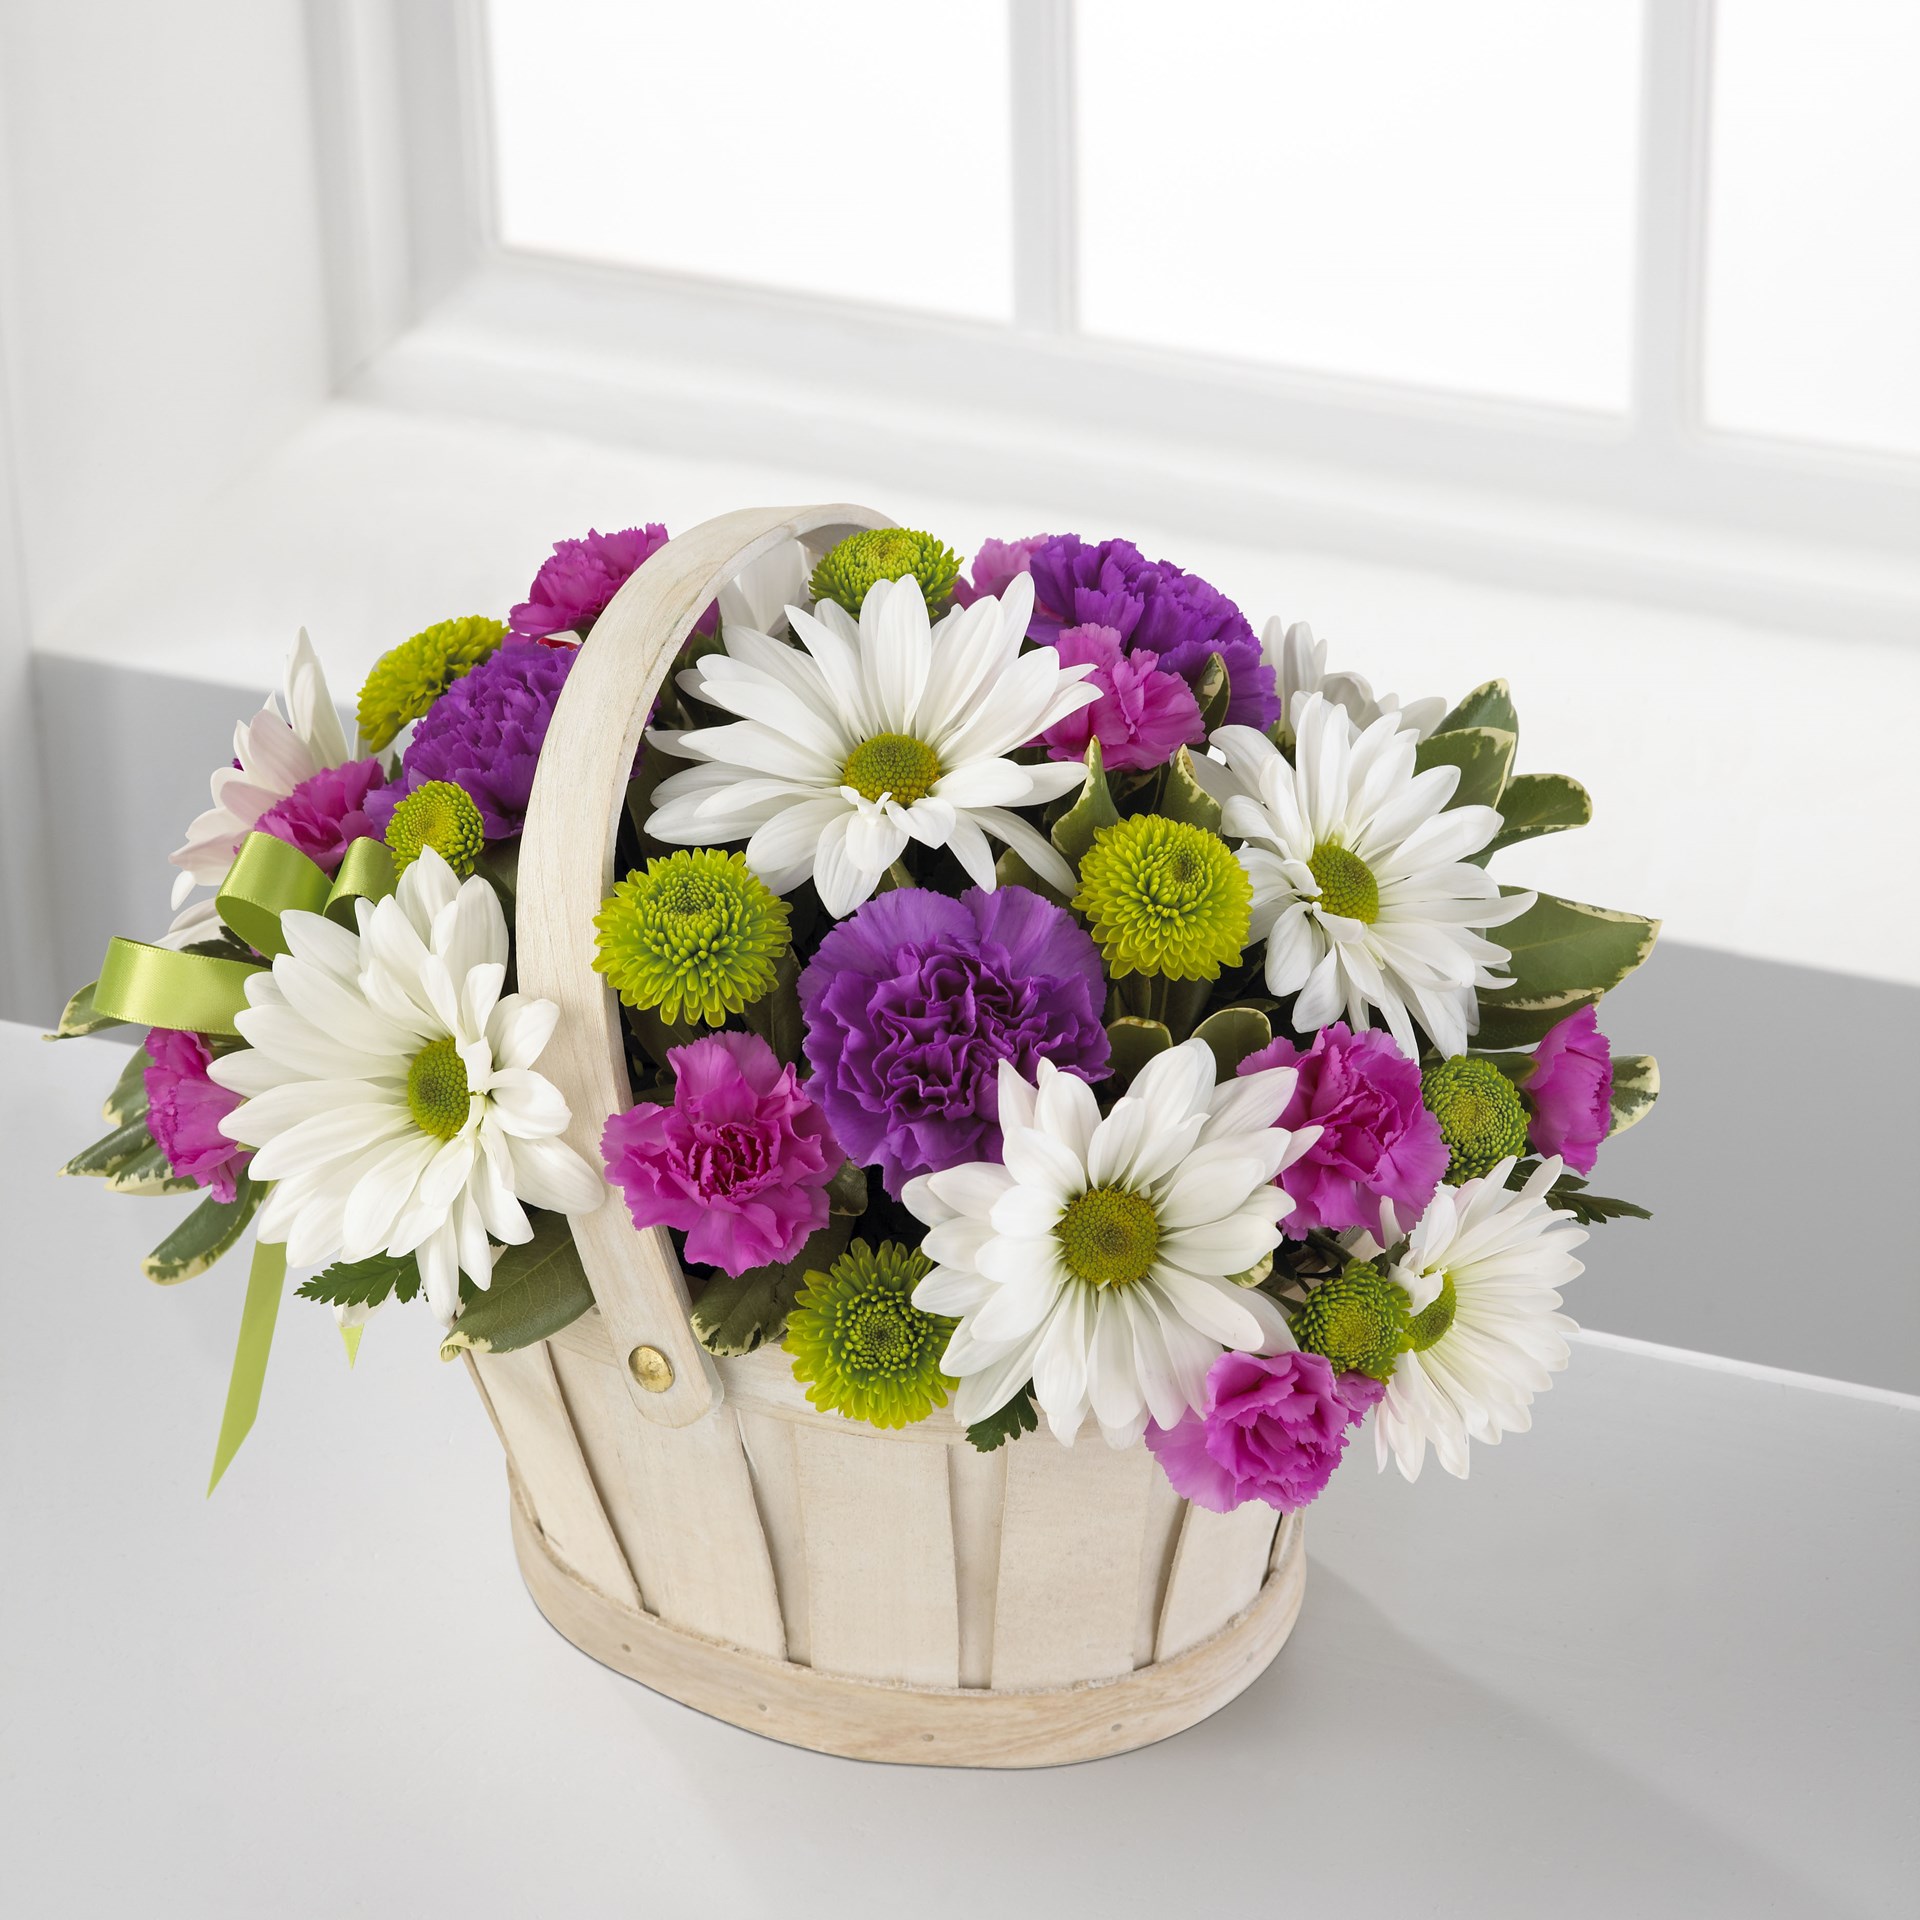 The FTD Blooming Bounty Bouquet - Basket included